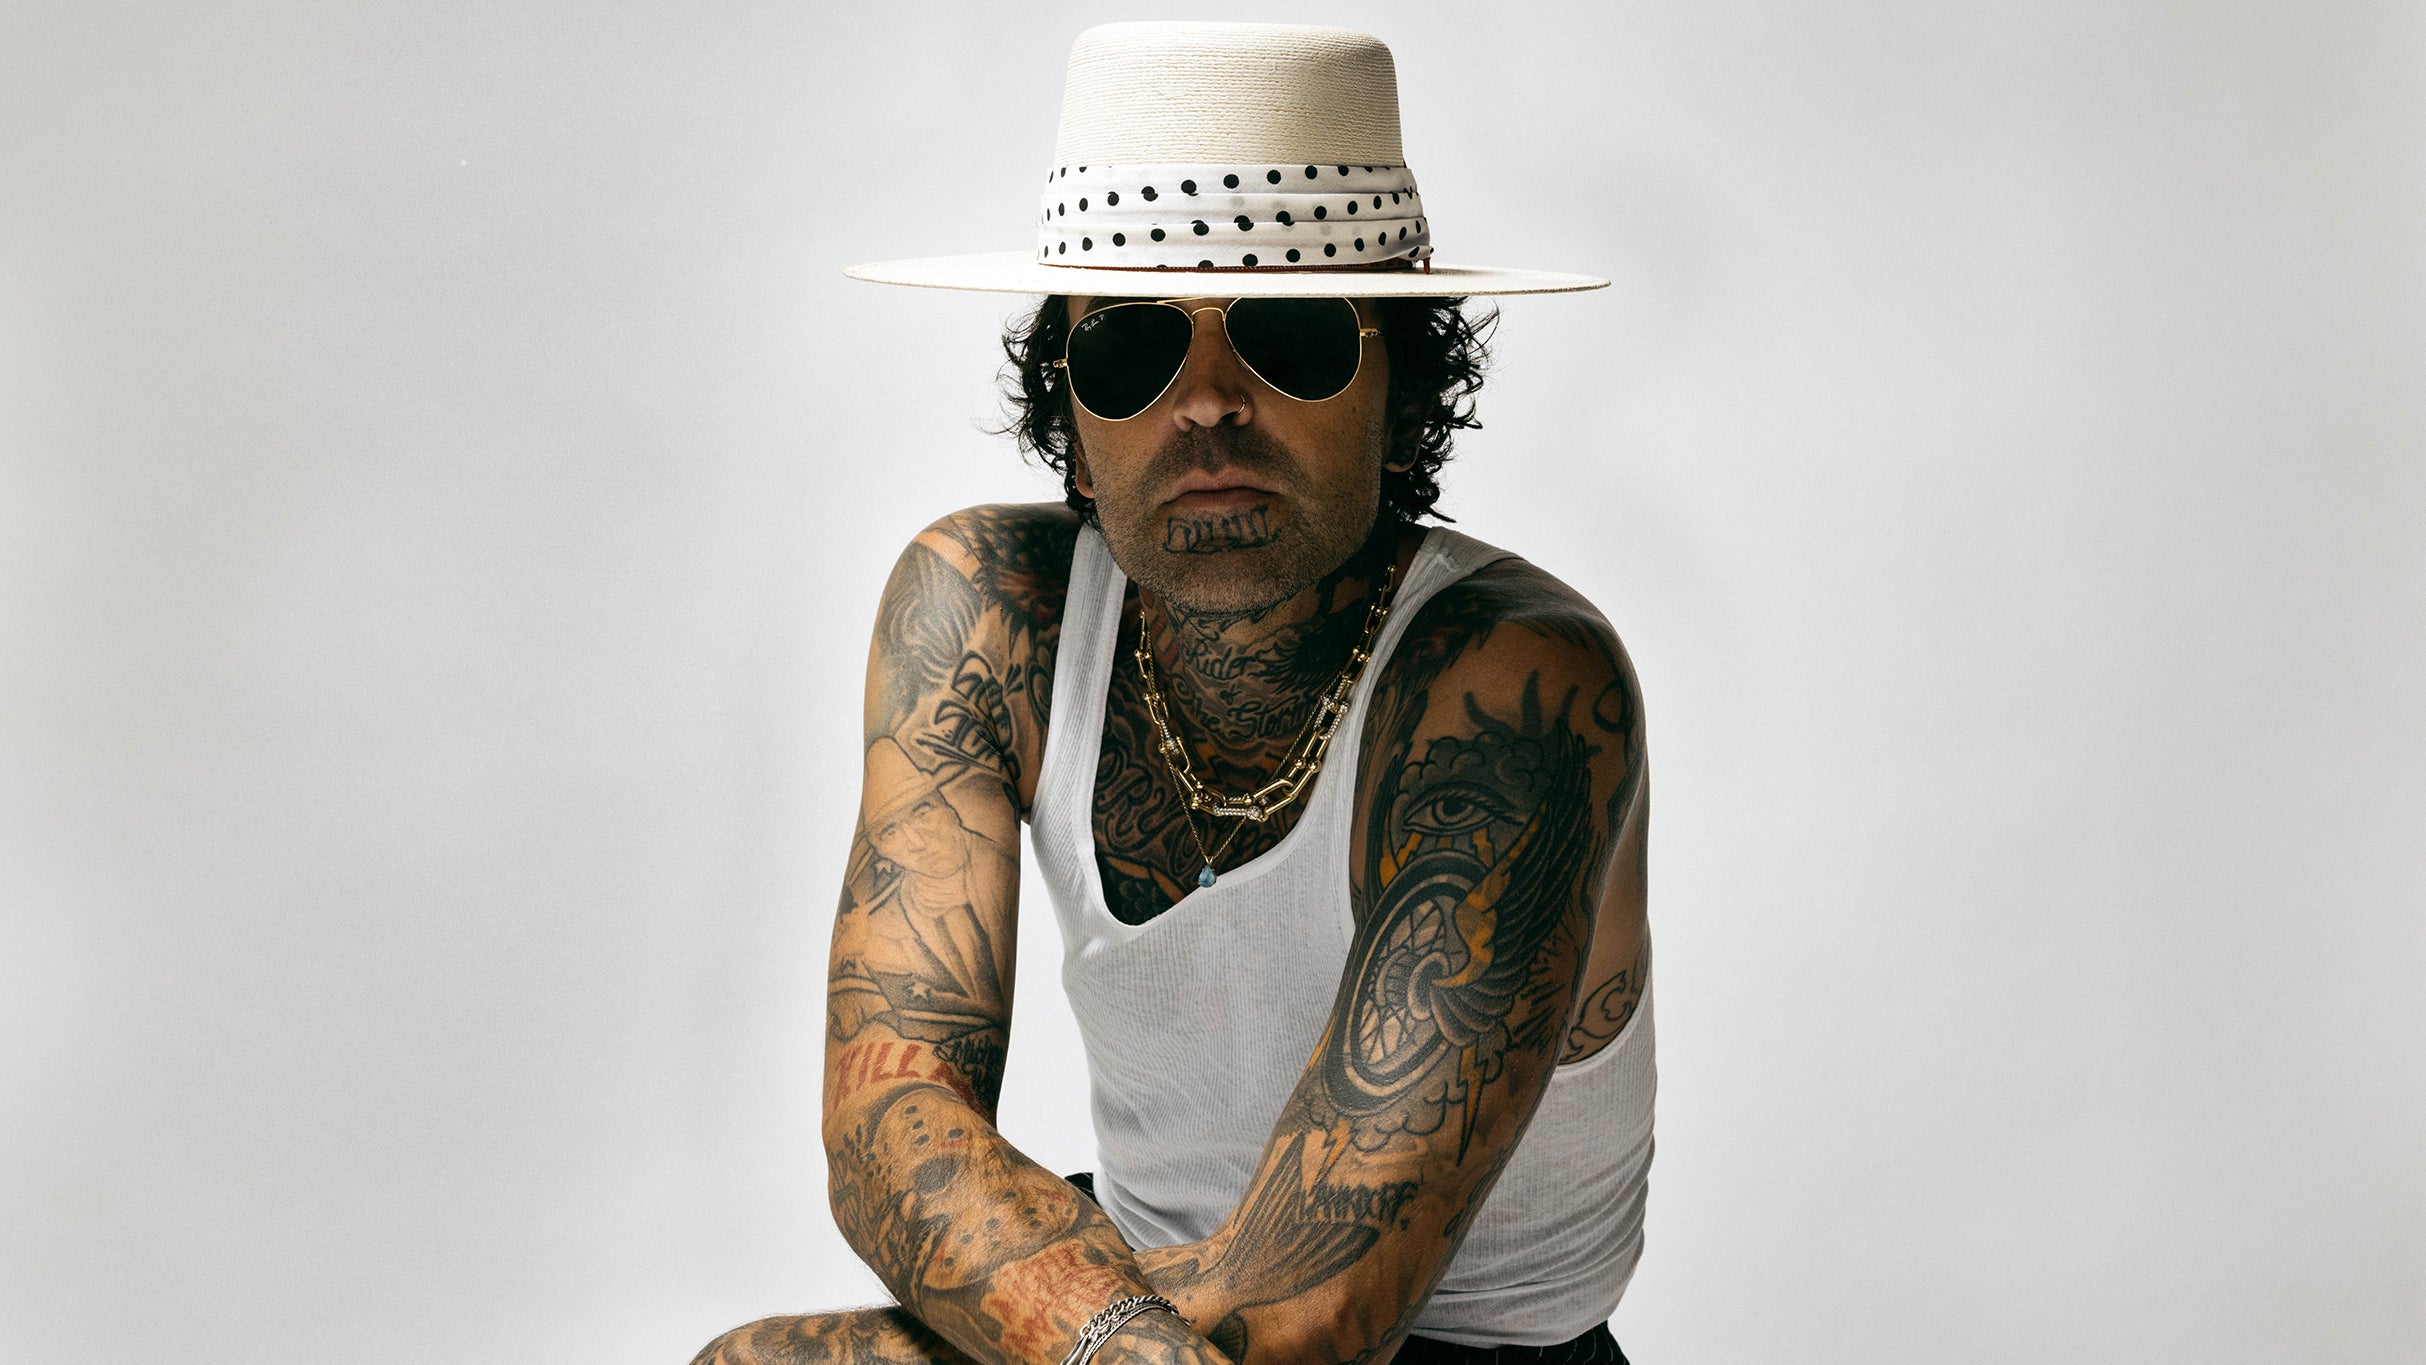 Yelawolf free presale password for early tickets in Reno